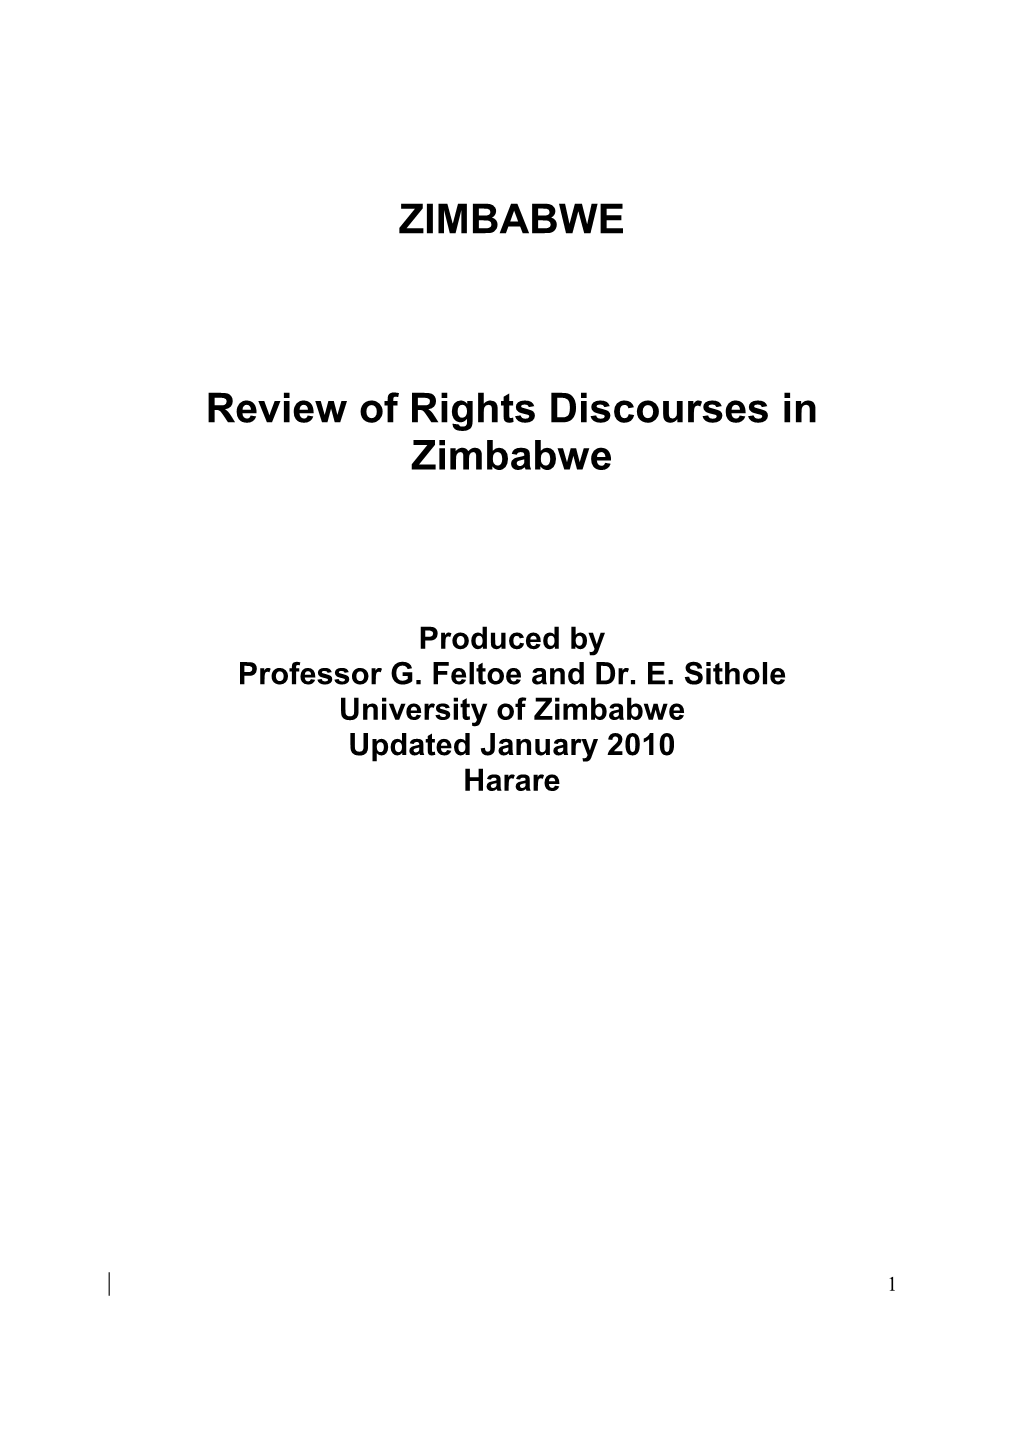 ZIMBABWE Review of Rights Discourses in Zimbabwe